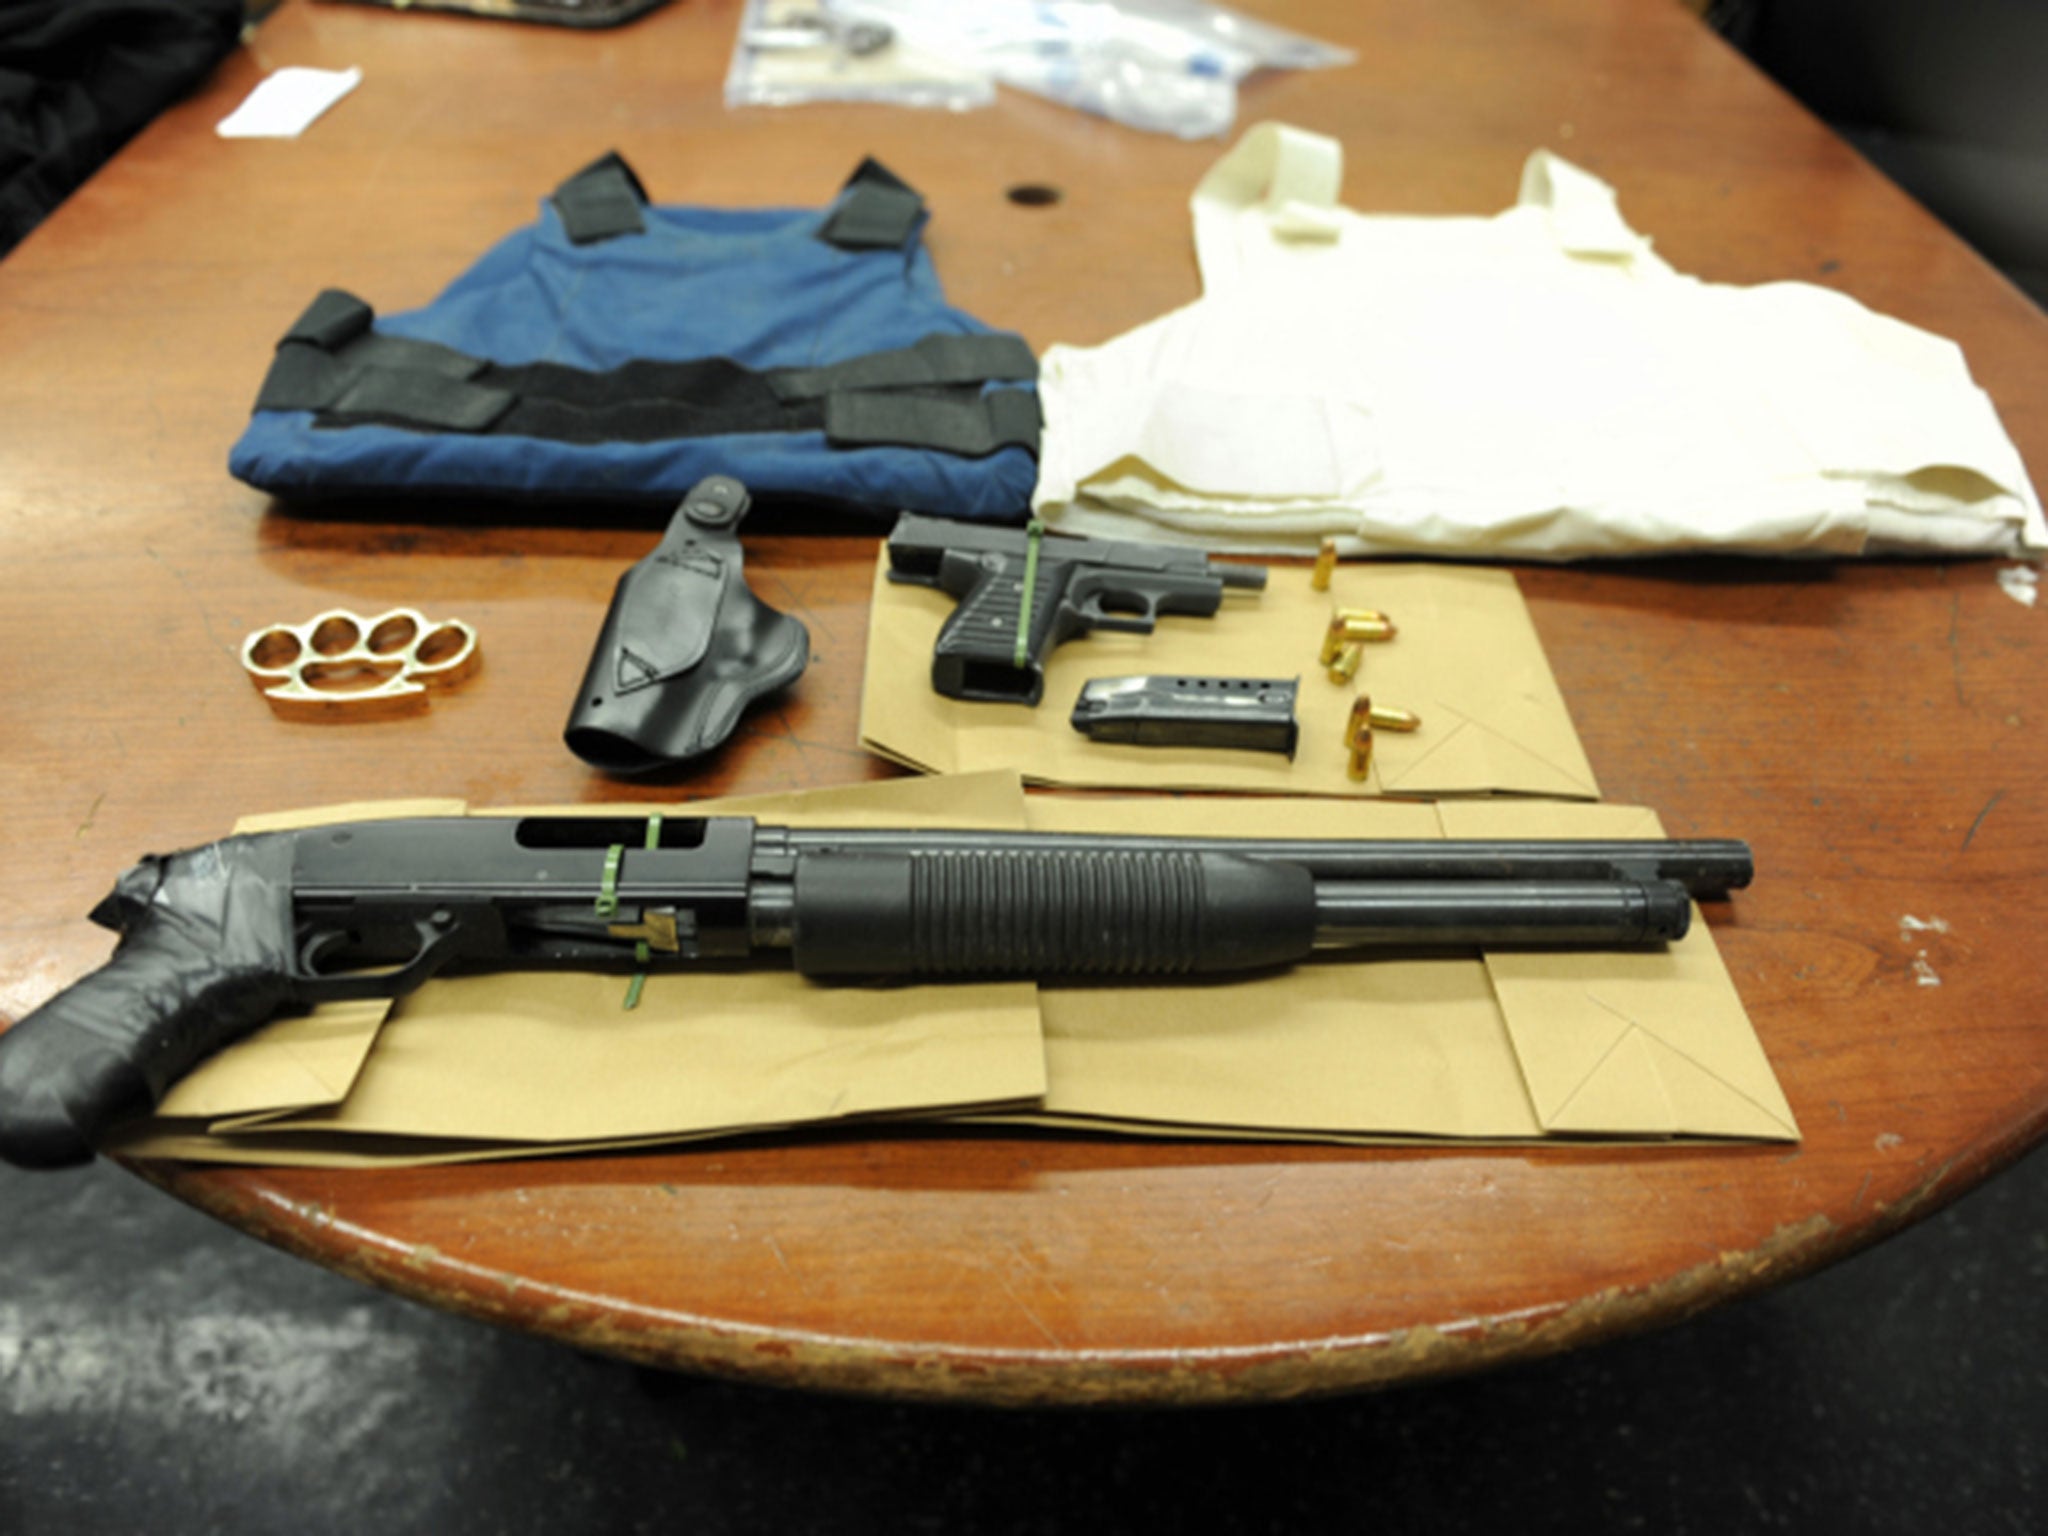 Weapons and ammunition allegedly found at home of Elvin Payamps